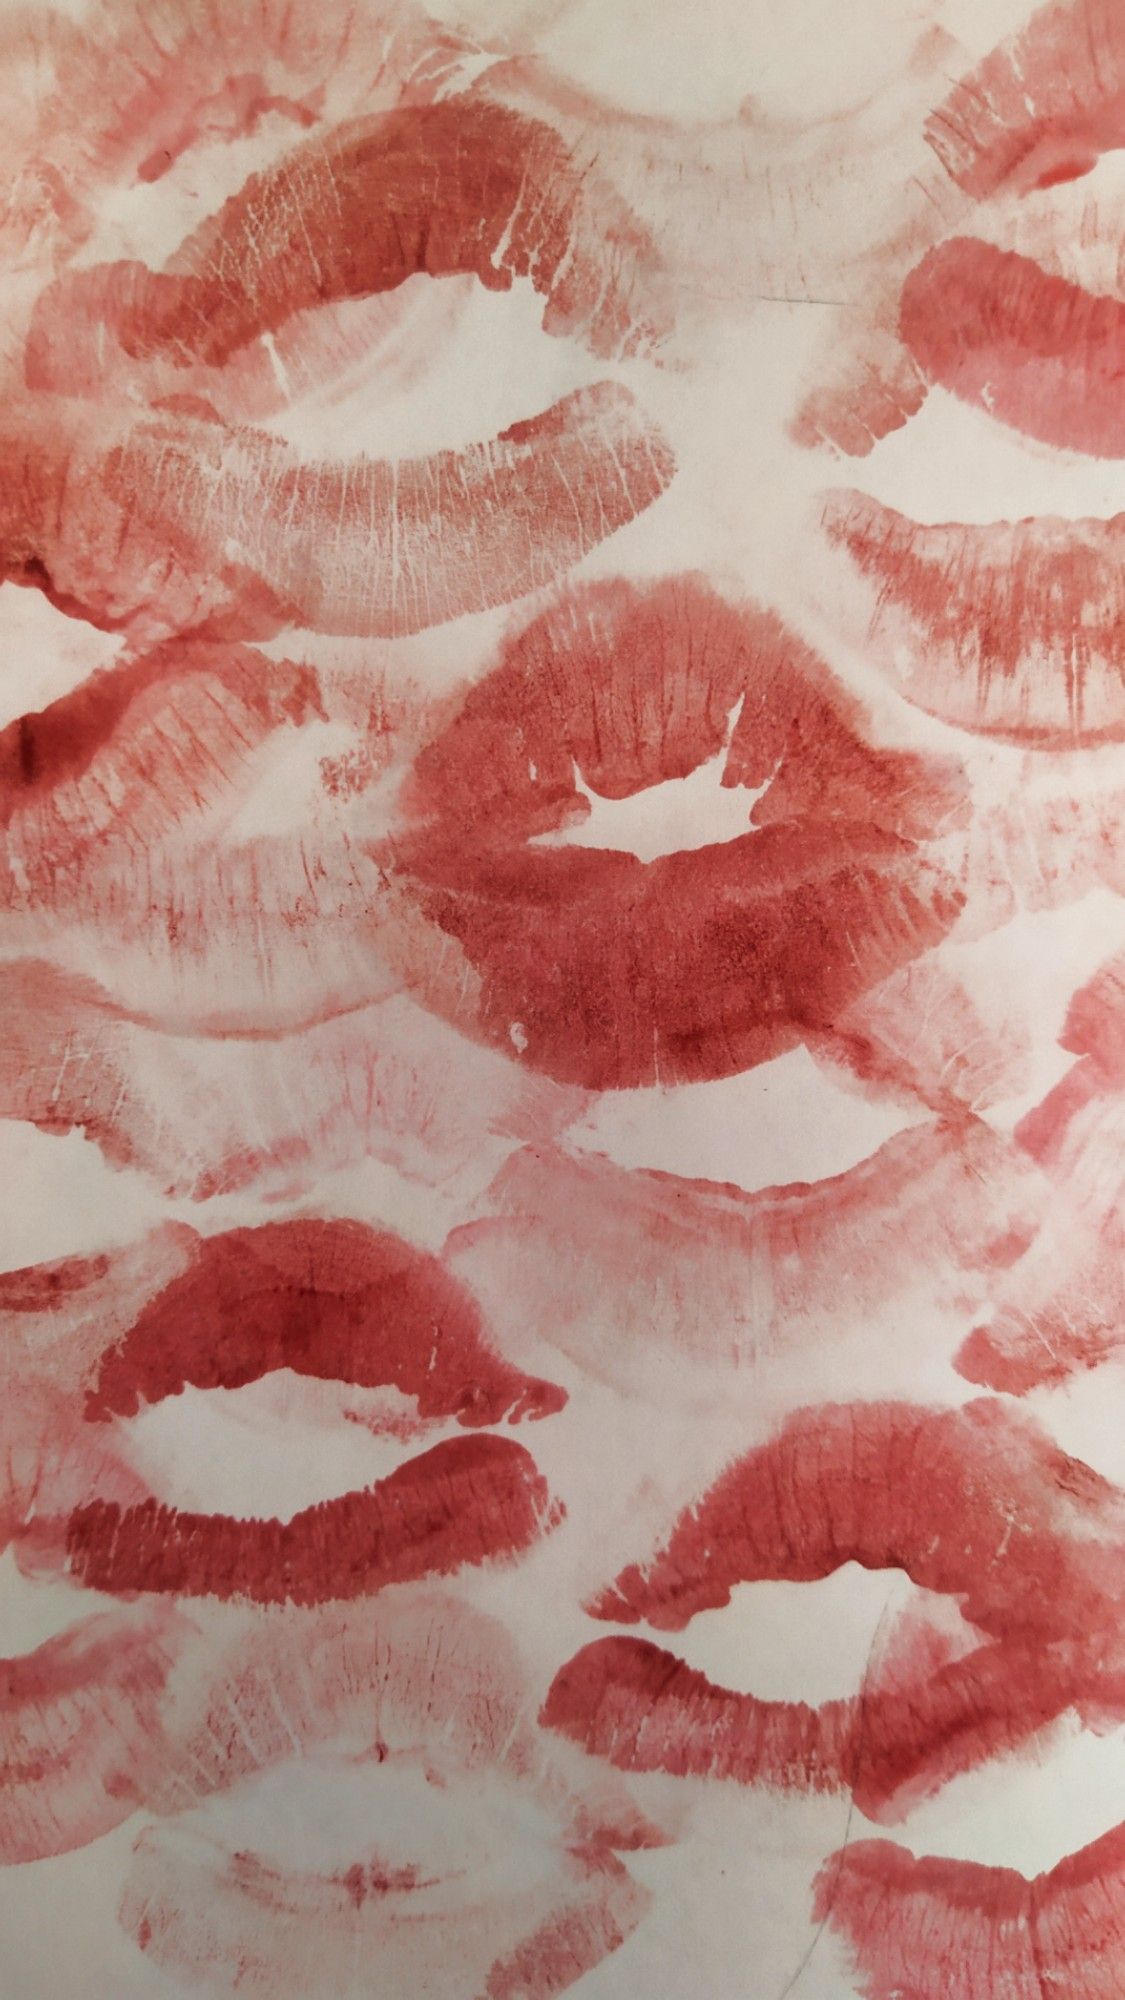 Red lipstick kisses on a white background - Lips